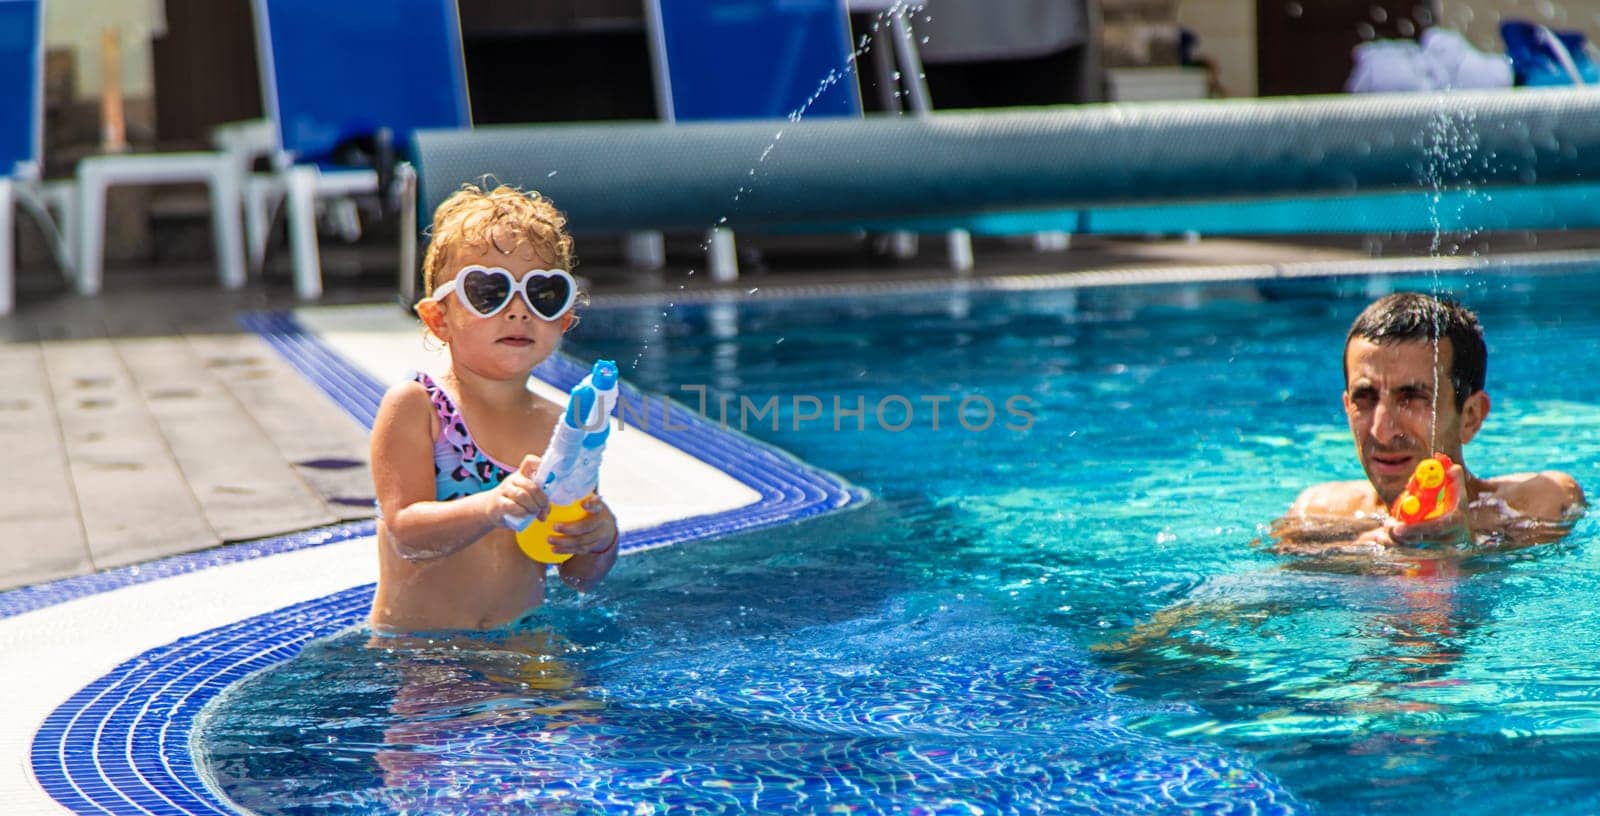 A child and his father play with a water pistol in the water. Selective focus. Kid.